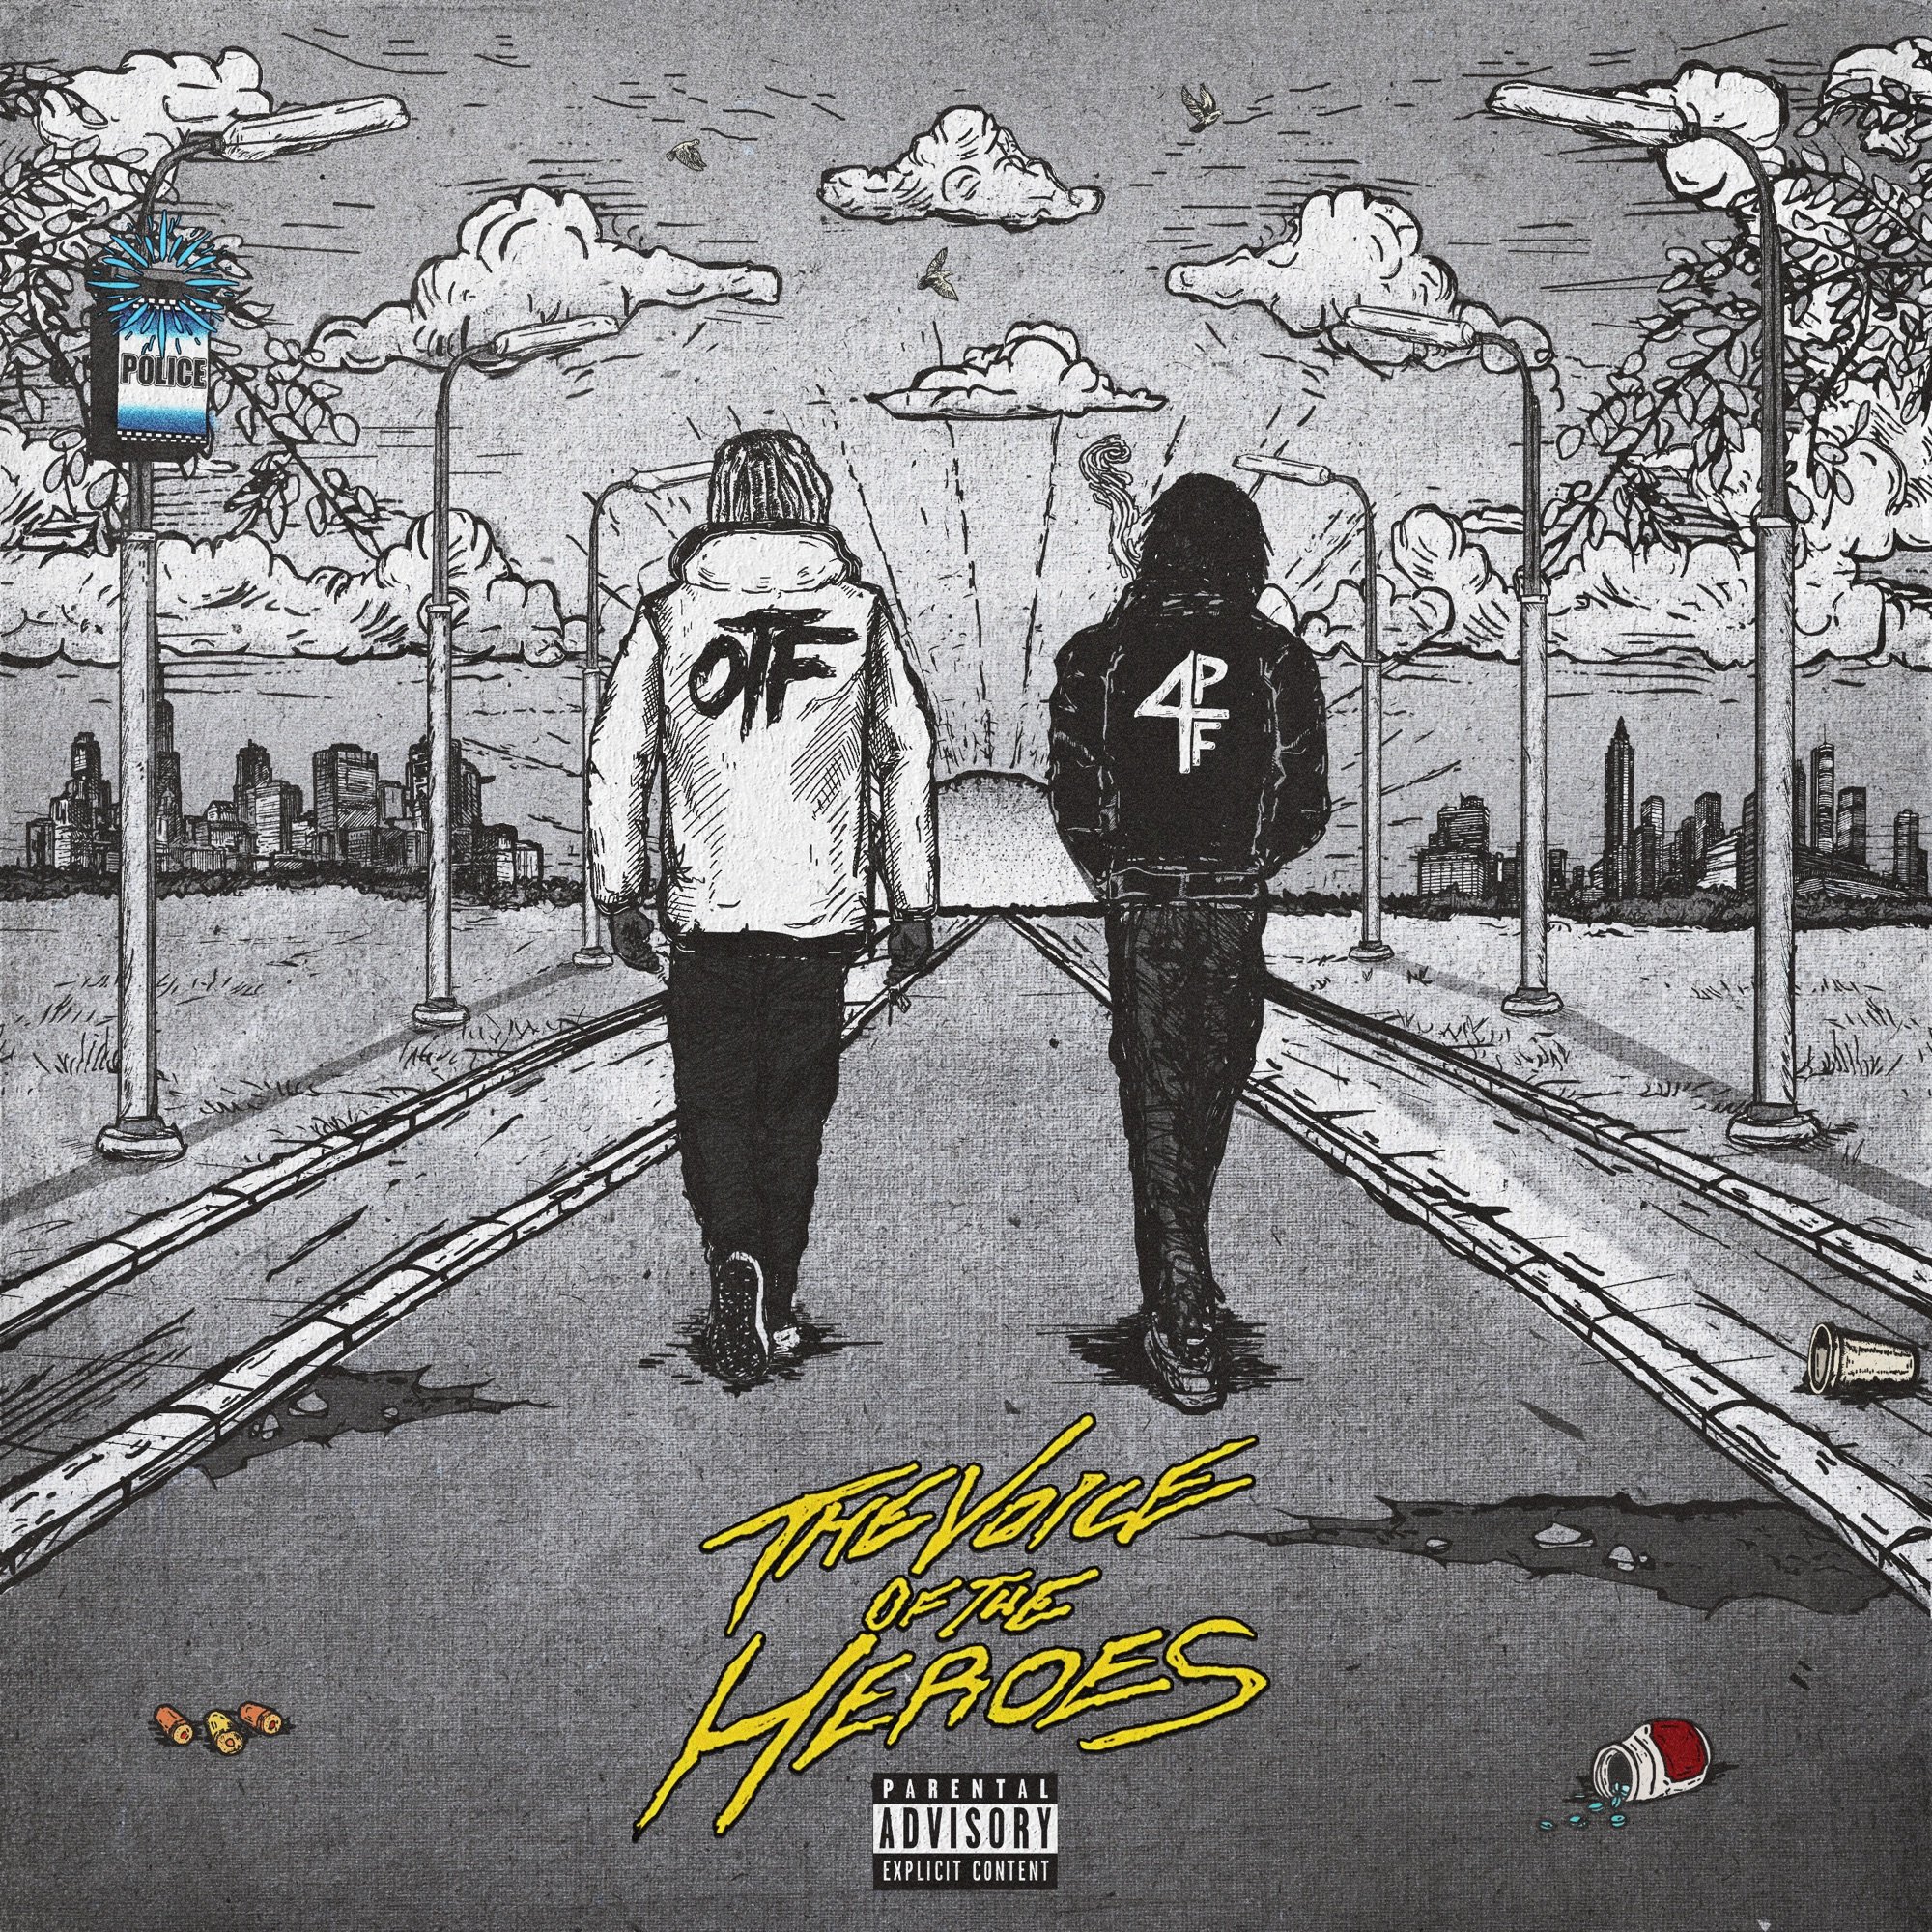 Download Lil Baby & Lil Durk The Voice of the Heroes ALBUM ZIP DOWNLOAD